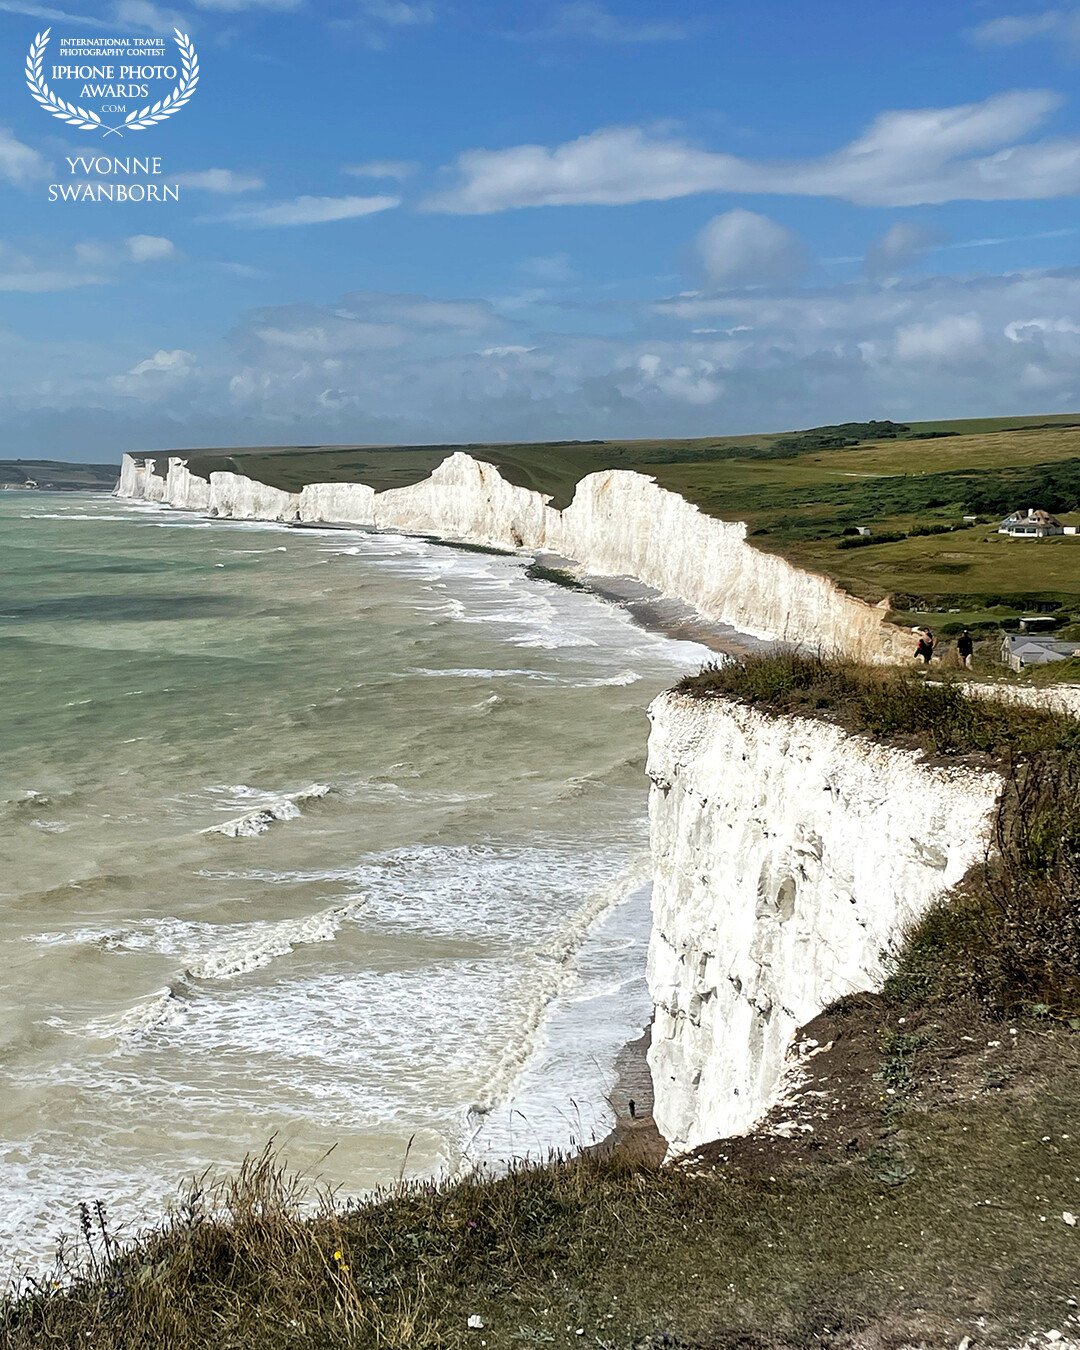 On the same trip we also visited the Seven Sisters, the chalk cliffs at East Sussex. It was a wonderful walk with beautiful nature and eventually the view at the Seven Sisters.